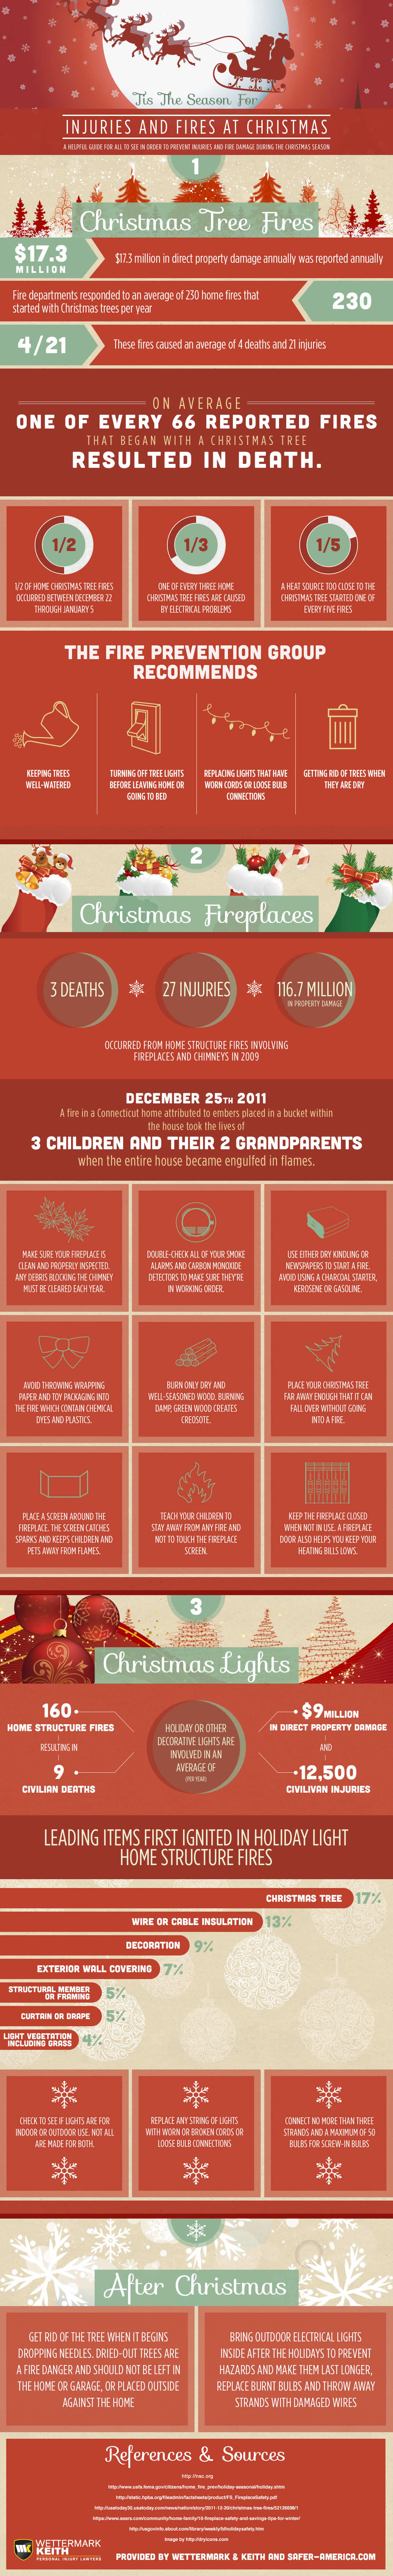 Christmas Safety Infographic